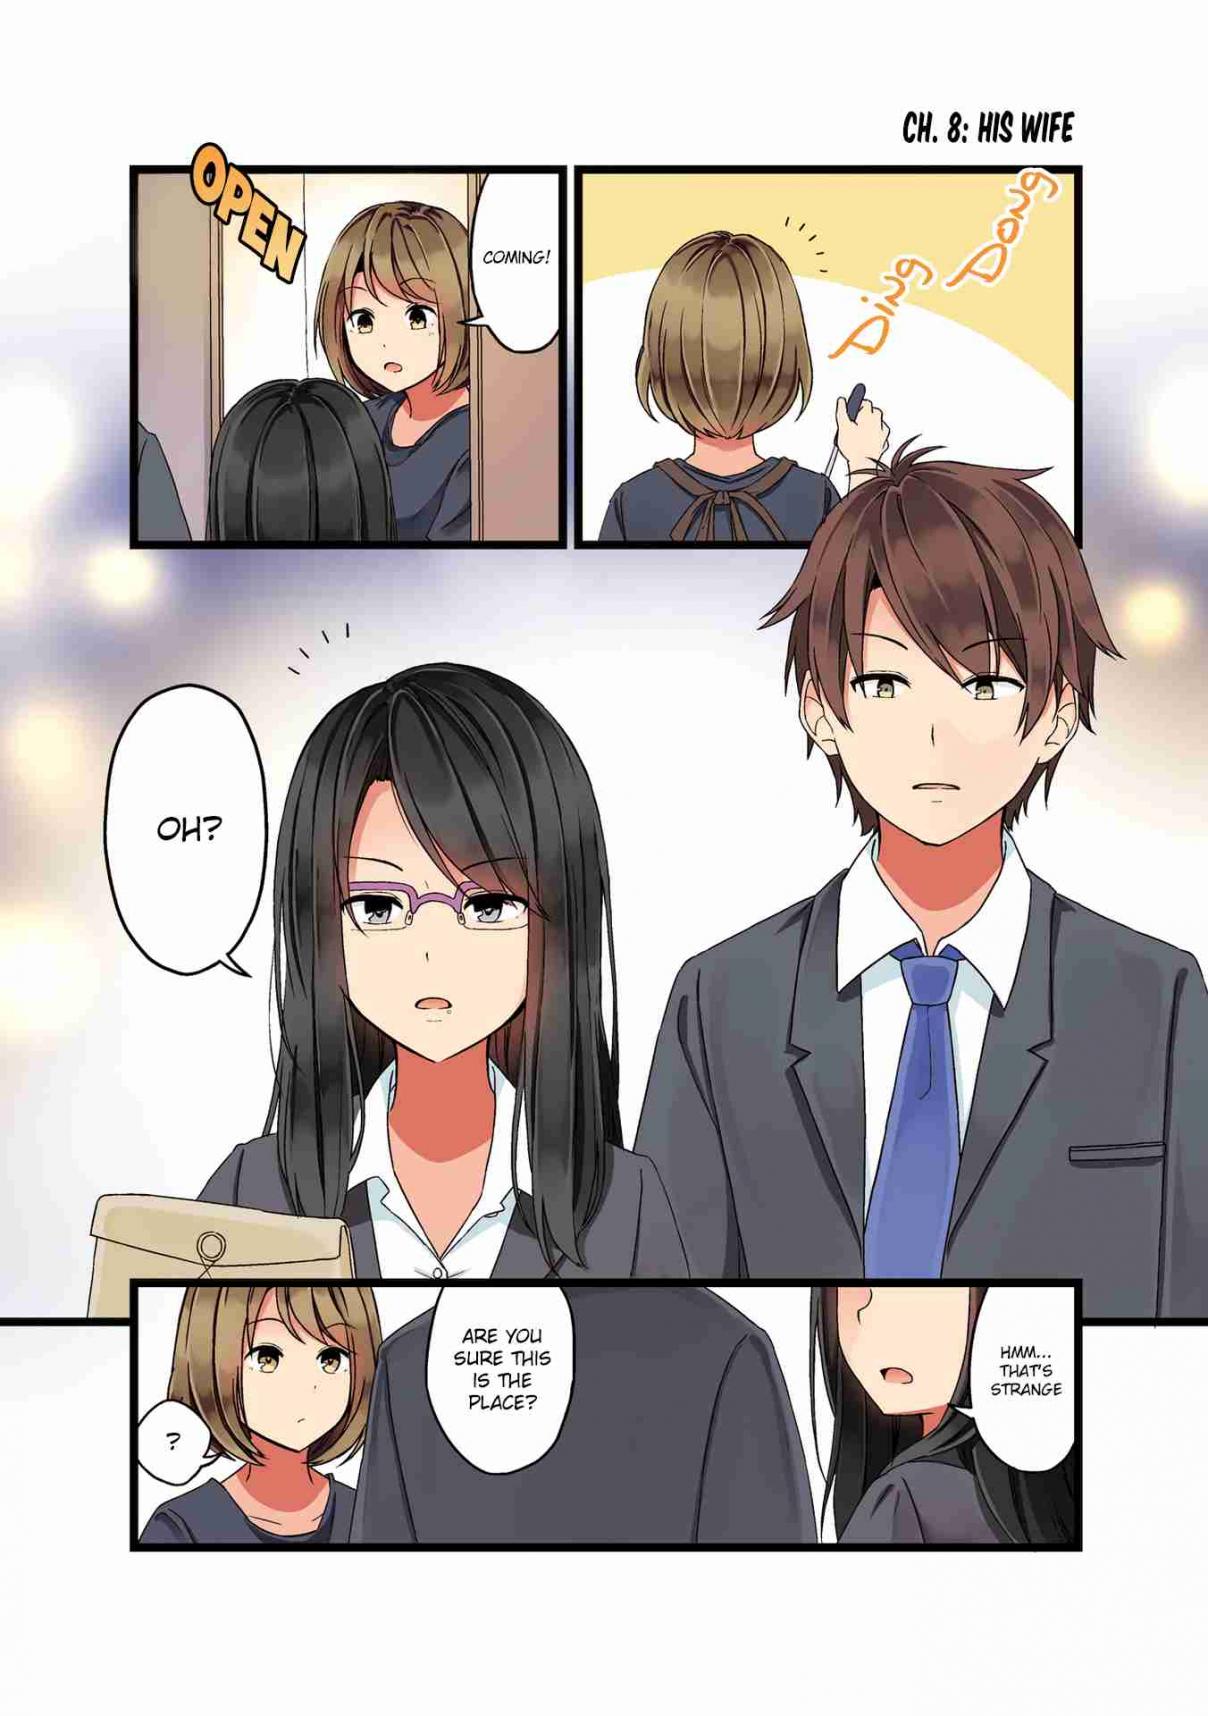 First Comes Love, Then Comes Marriage Vol. 1 Ch. 8 Being Called His Wife for the First Time